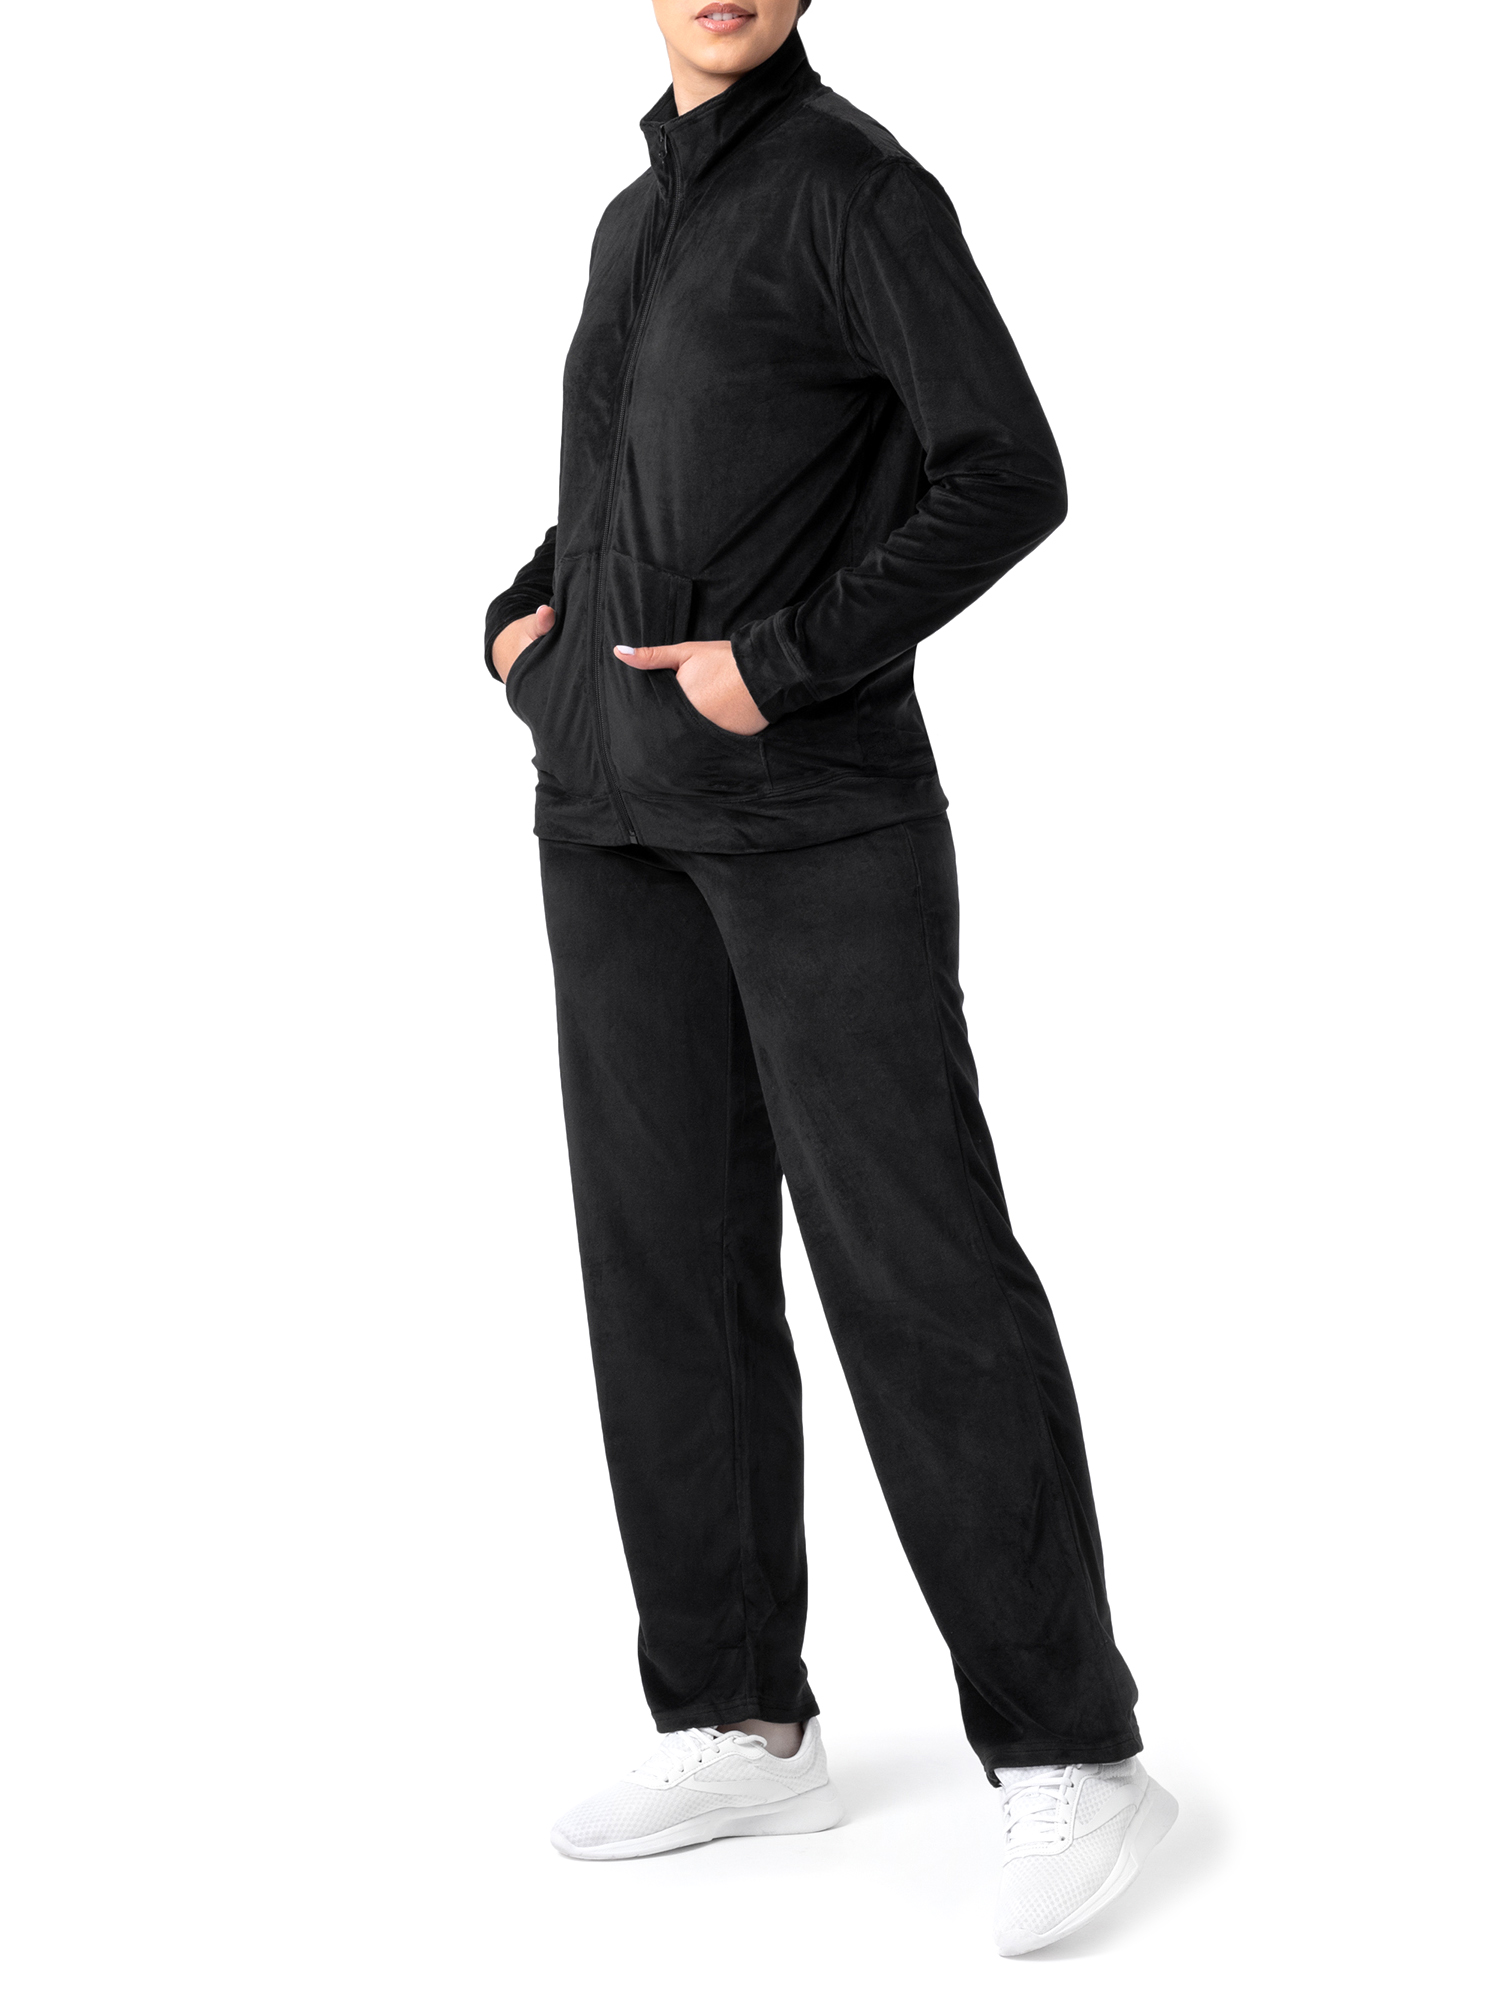 Athletic Works Women's Active Velour Zip-Up Track Jacket and Pants, 2-Piece Set - image 2 of 6